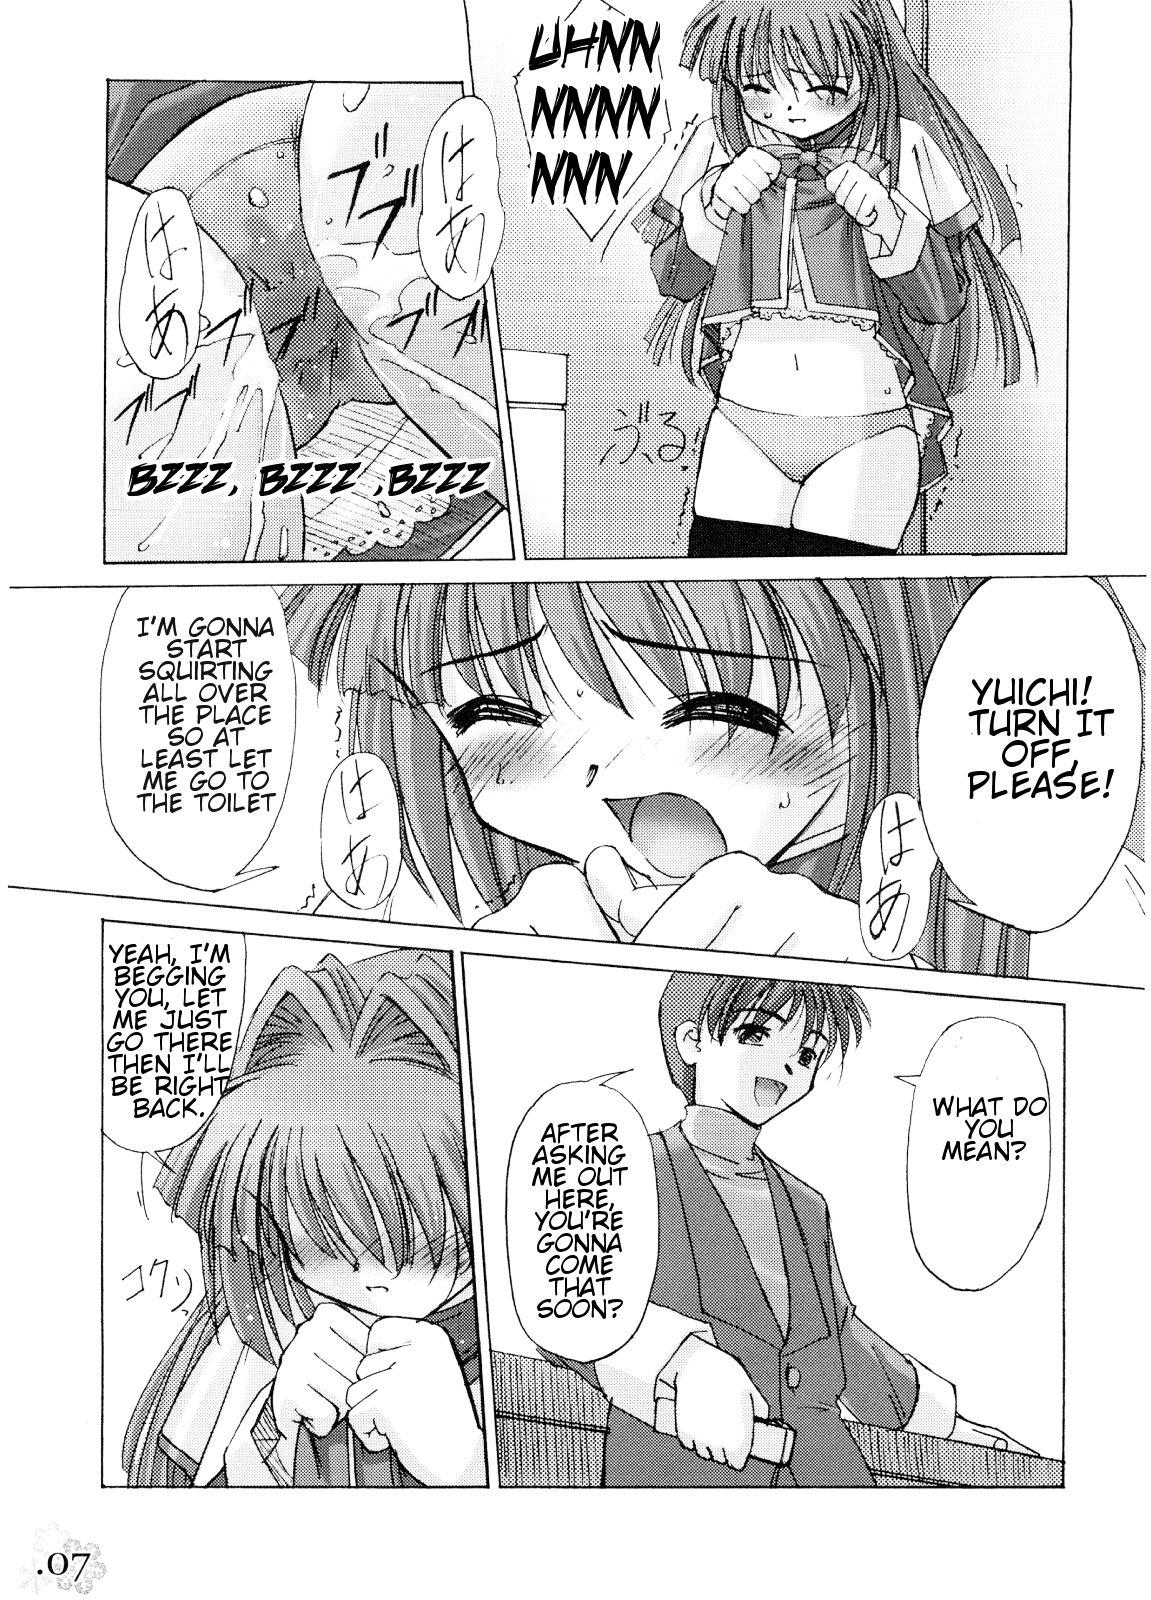 Bdsm You Are The Only Version: Kanon Part 2 - Kanon Reversecowgirl - Page 4